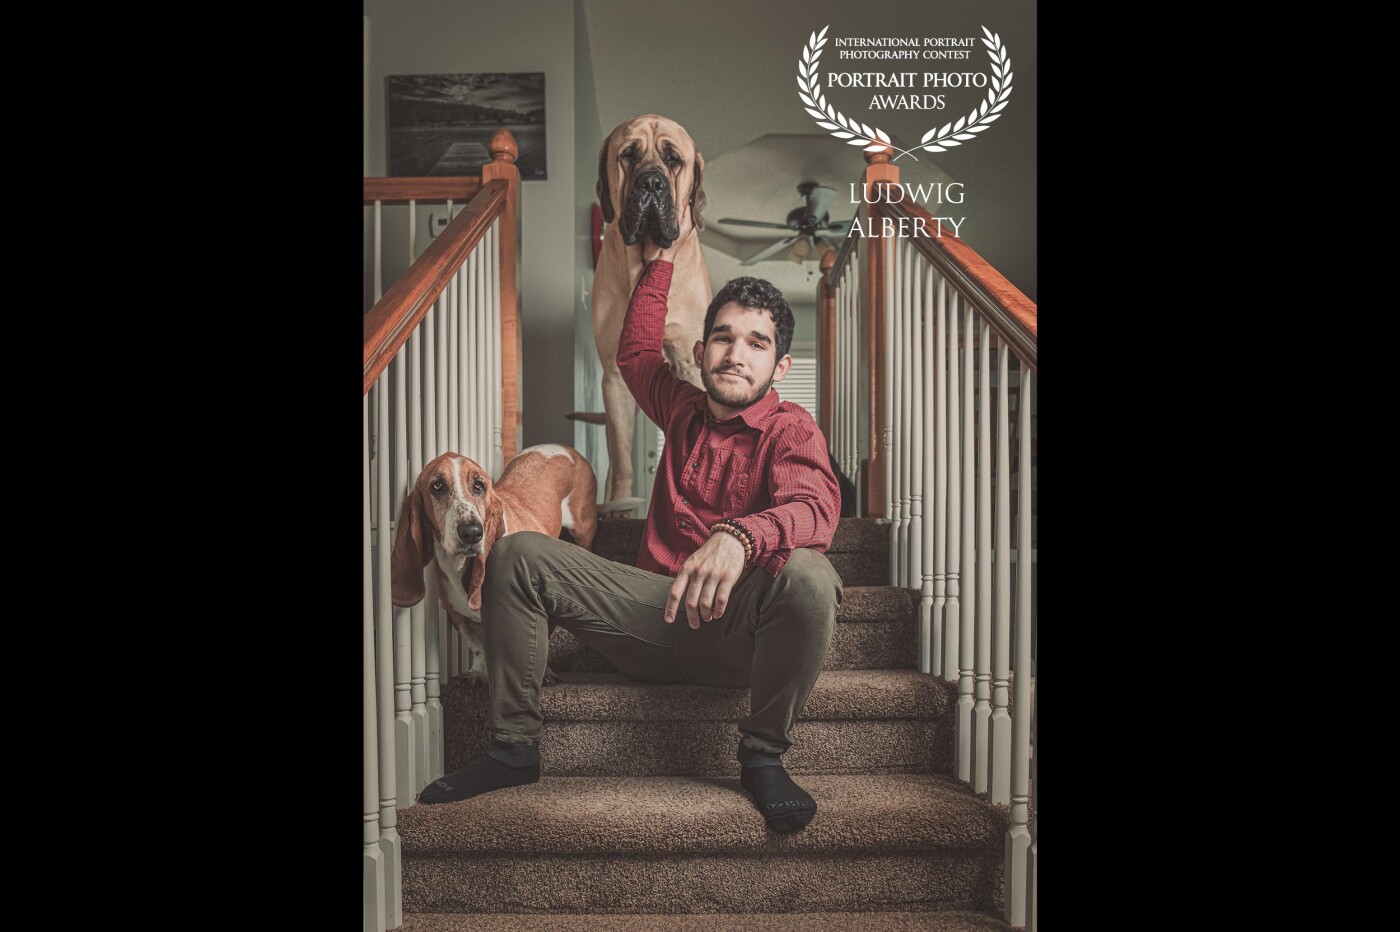 The pack, how pets are part of the family. This boy is proud of him and his fur ones, how they together are making the story of his life.